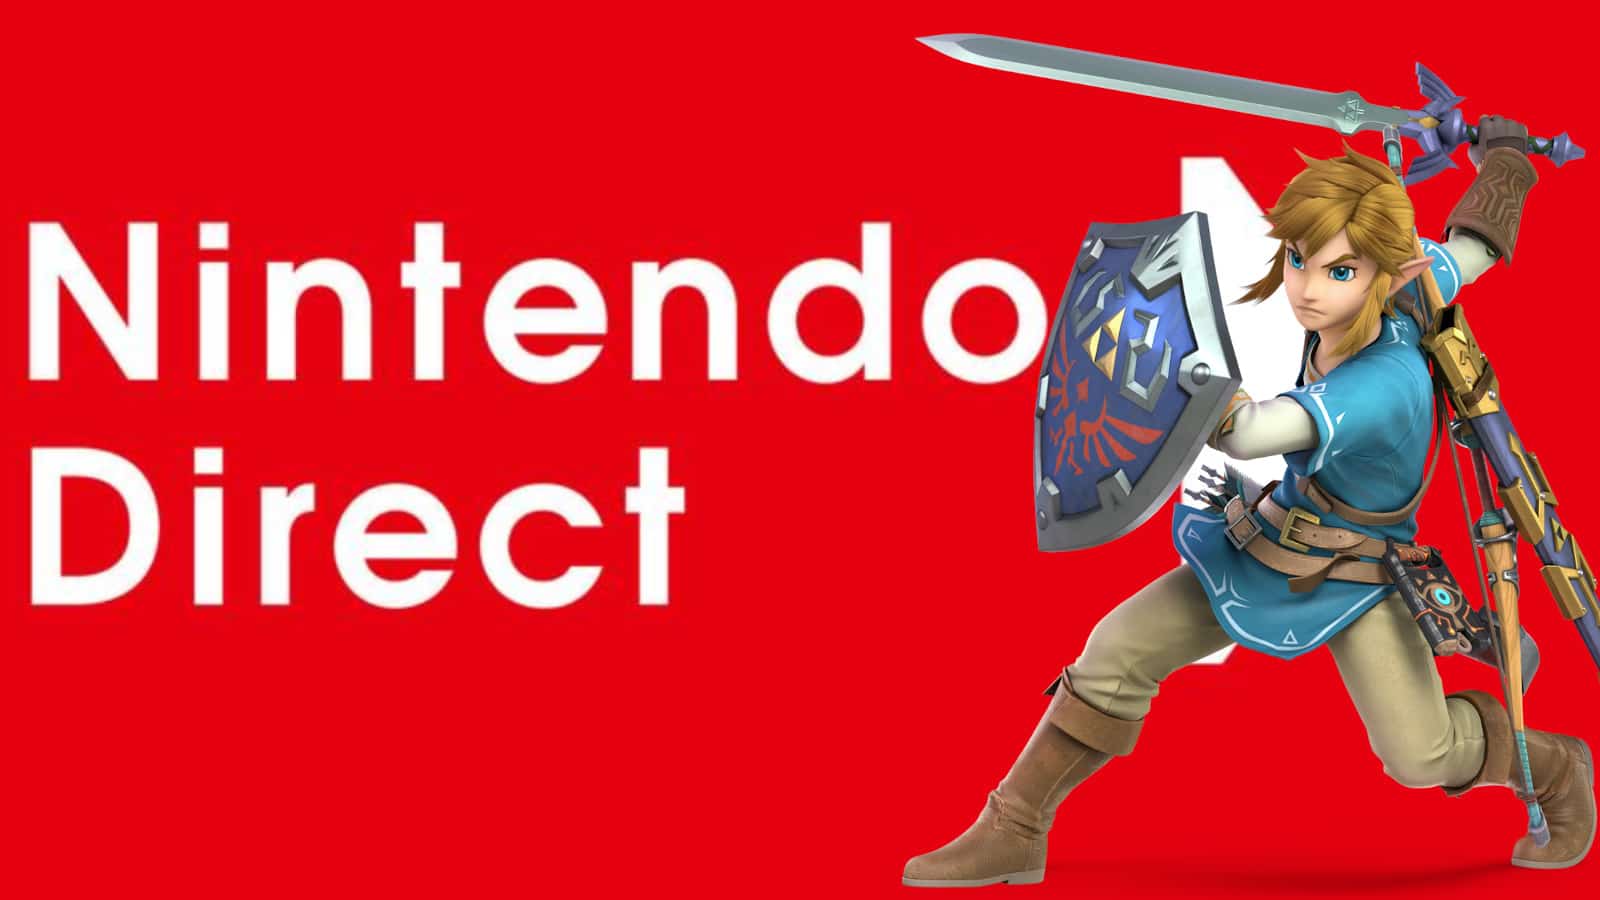 Nintendo Direct with Link